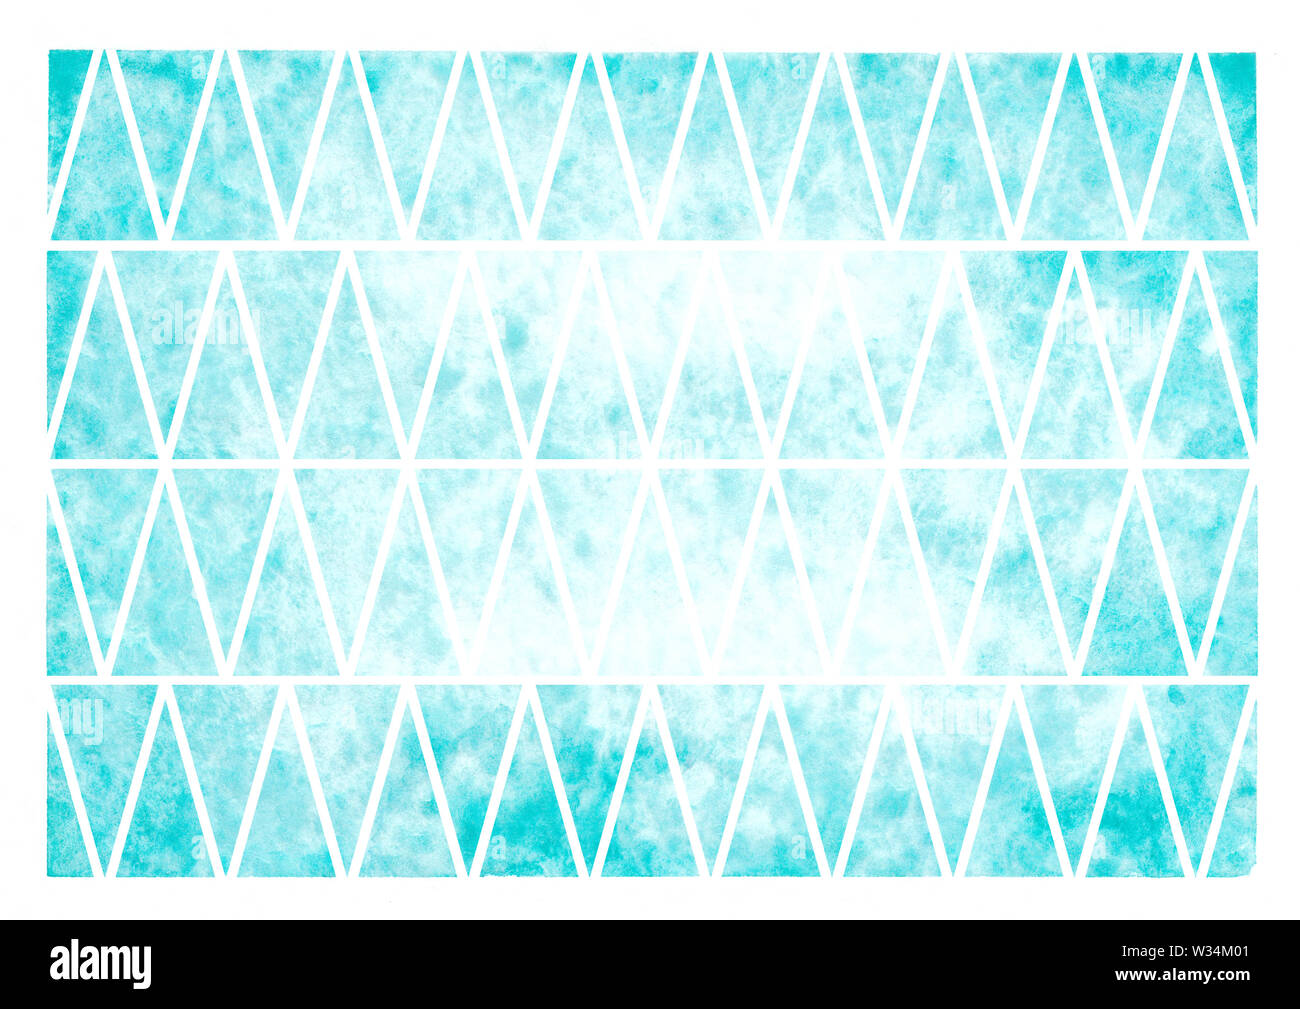 Hand drawn seamless watercolor mint pattern - invitations, posters, cards template - teal blue wet paint abstract triangle endless background Stock Photo